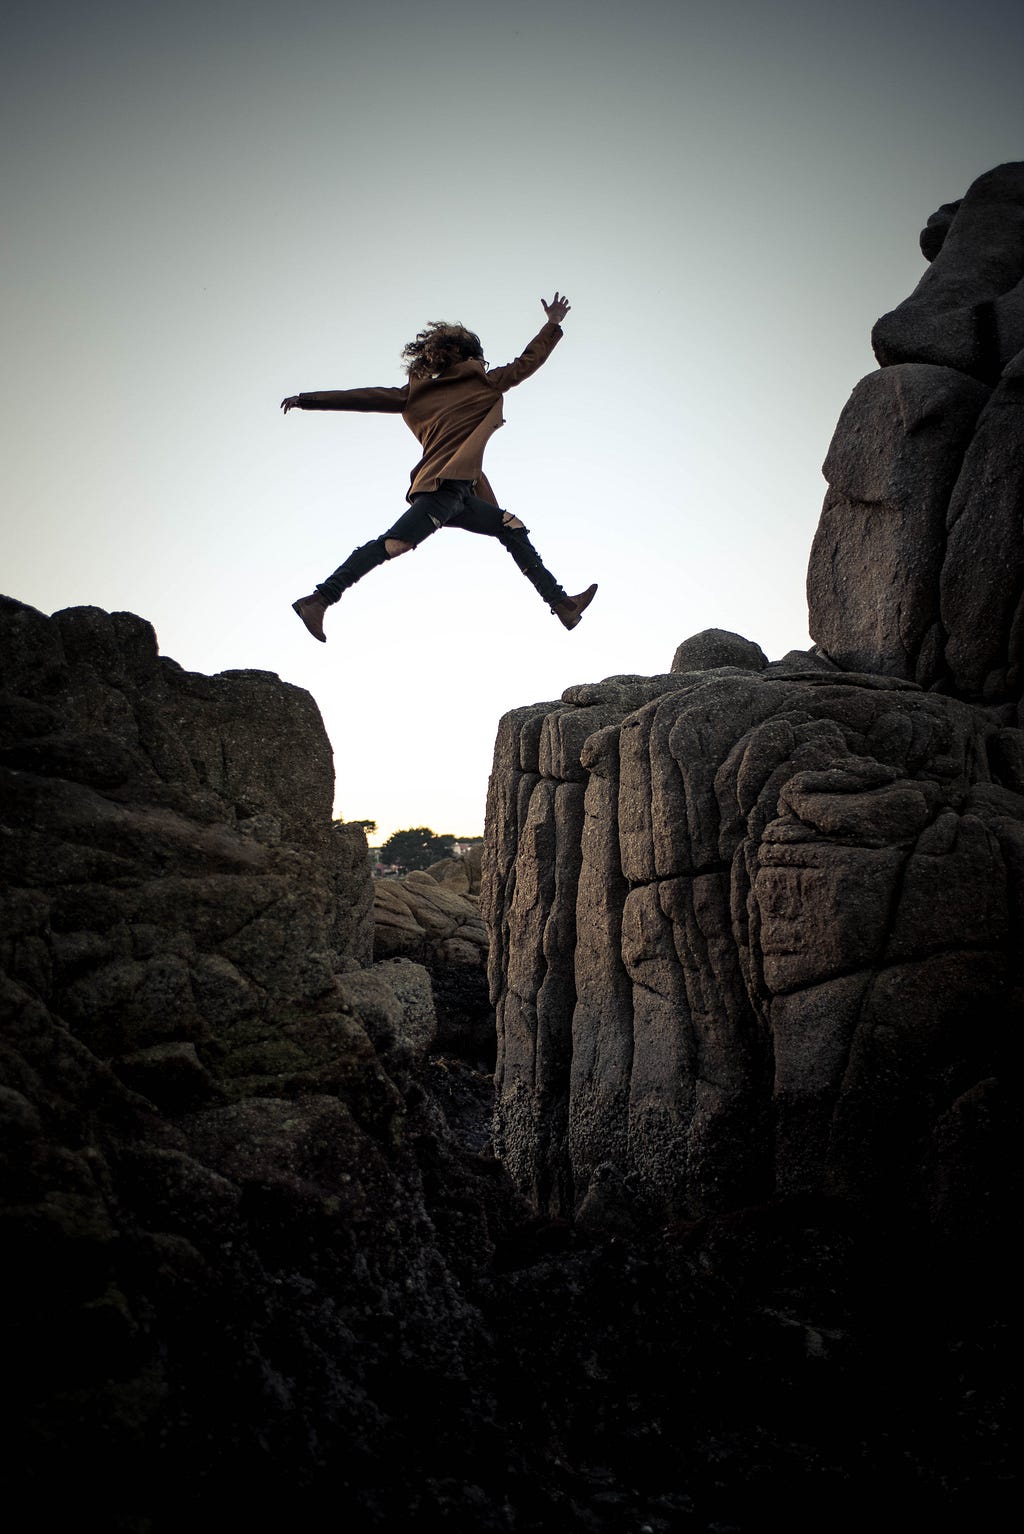 A girl jumping over the crevice between two big rocks.